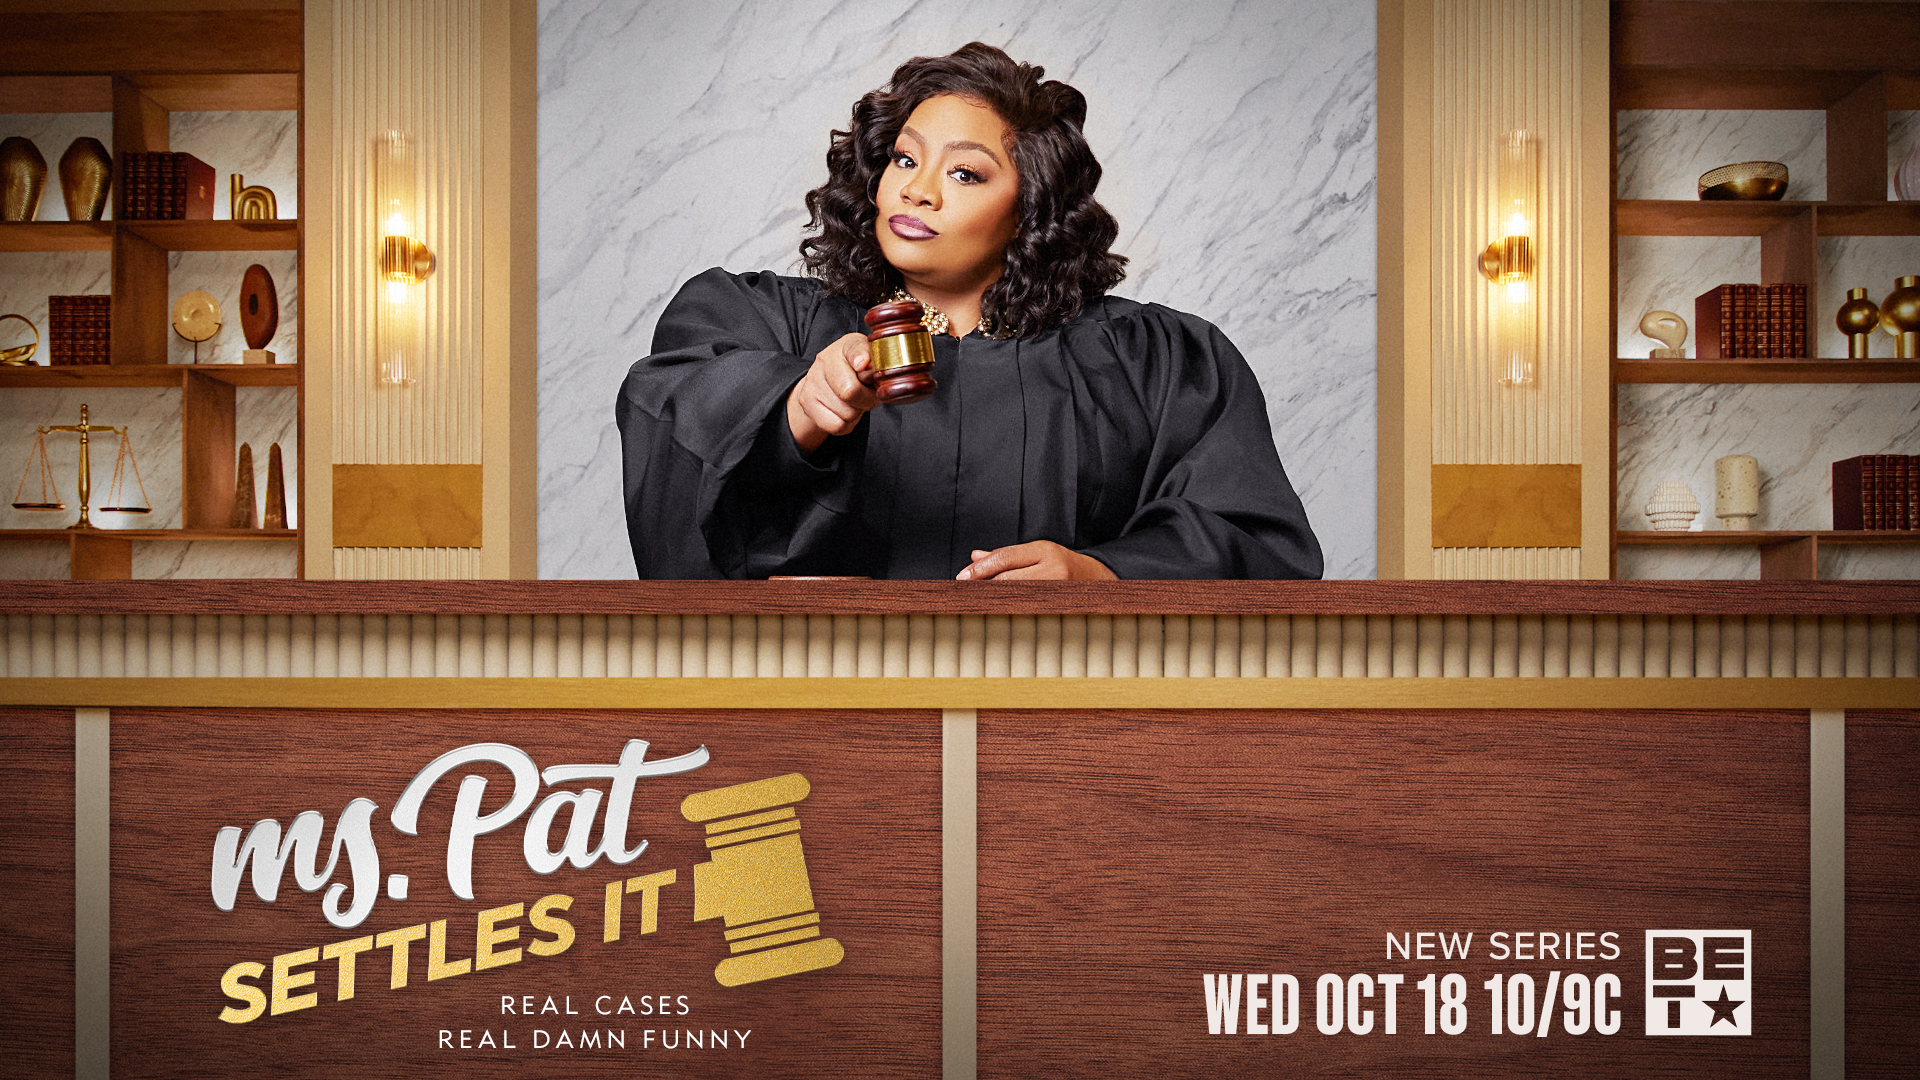 #Ms. Pat Settles It: Comic Pat Williams Becomes a TV Judge for New BET Series